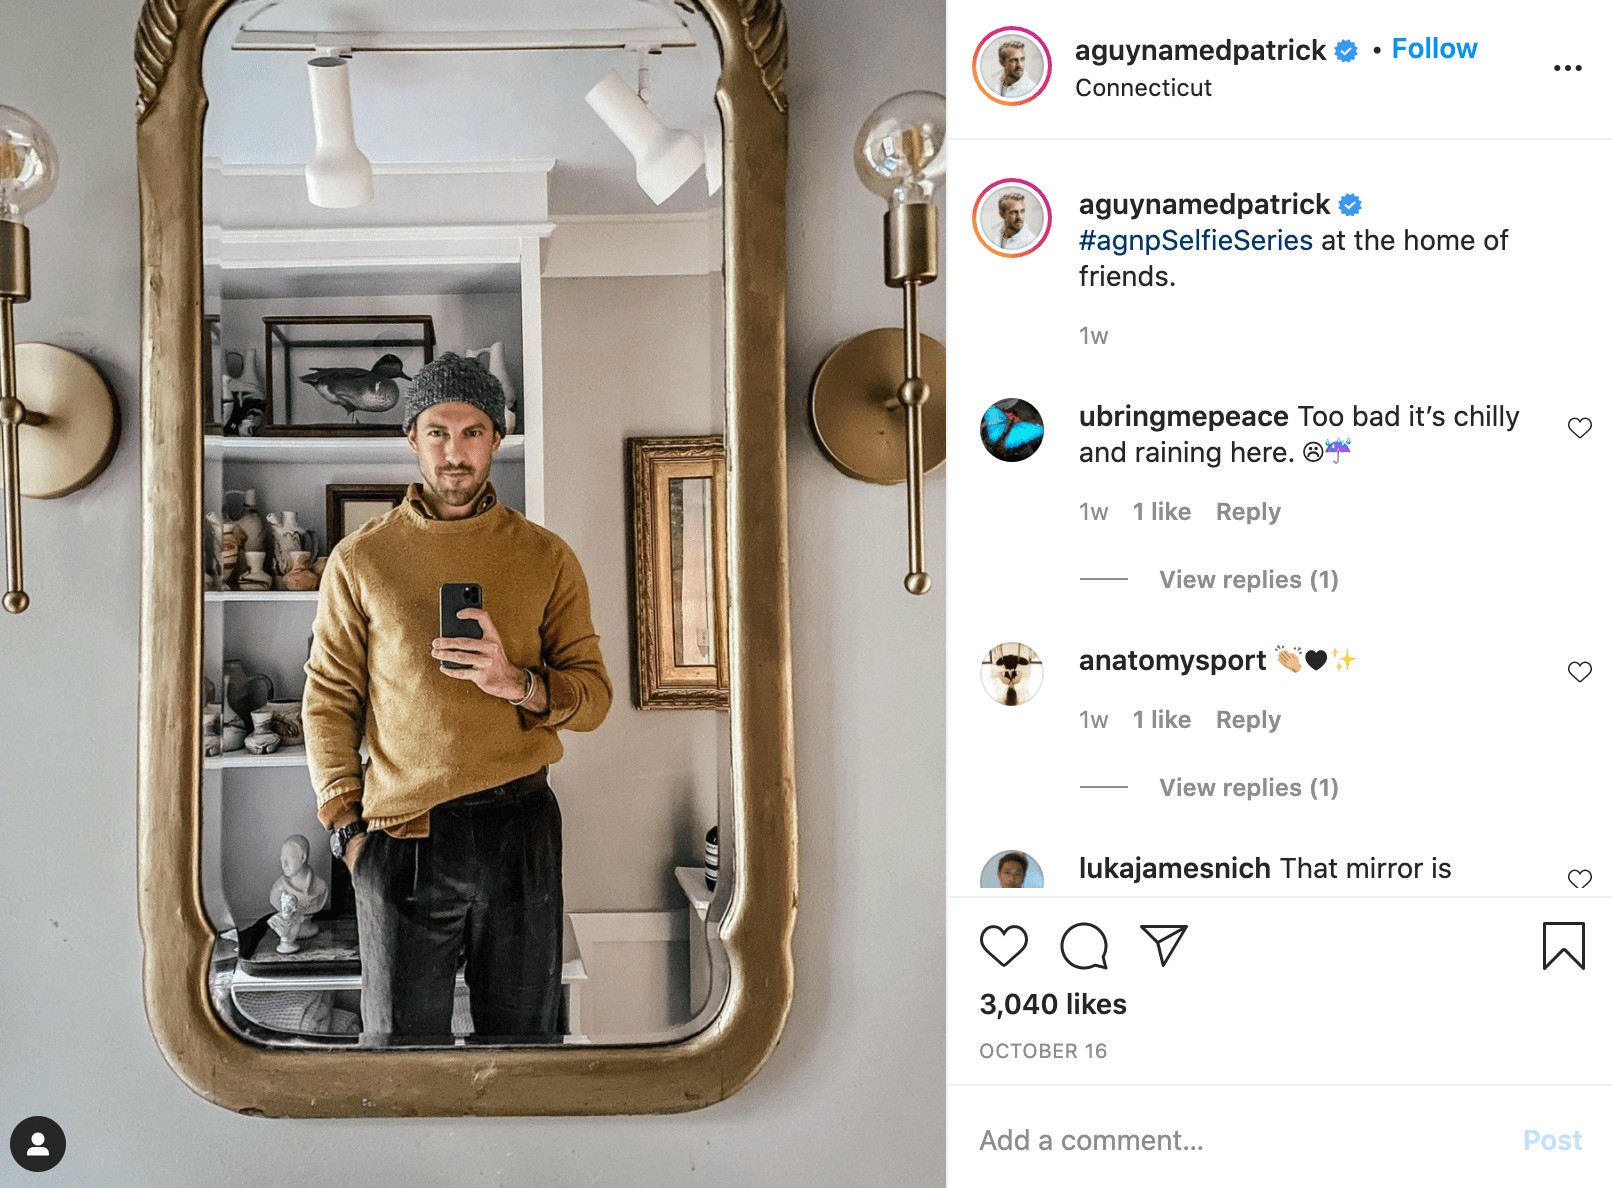 @aguynamedpatrick instagram picture of himself in mirror holding a phone taking a picture of himself